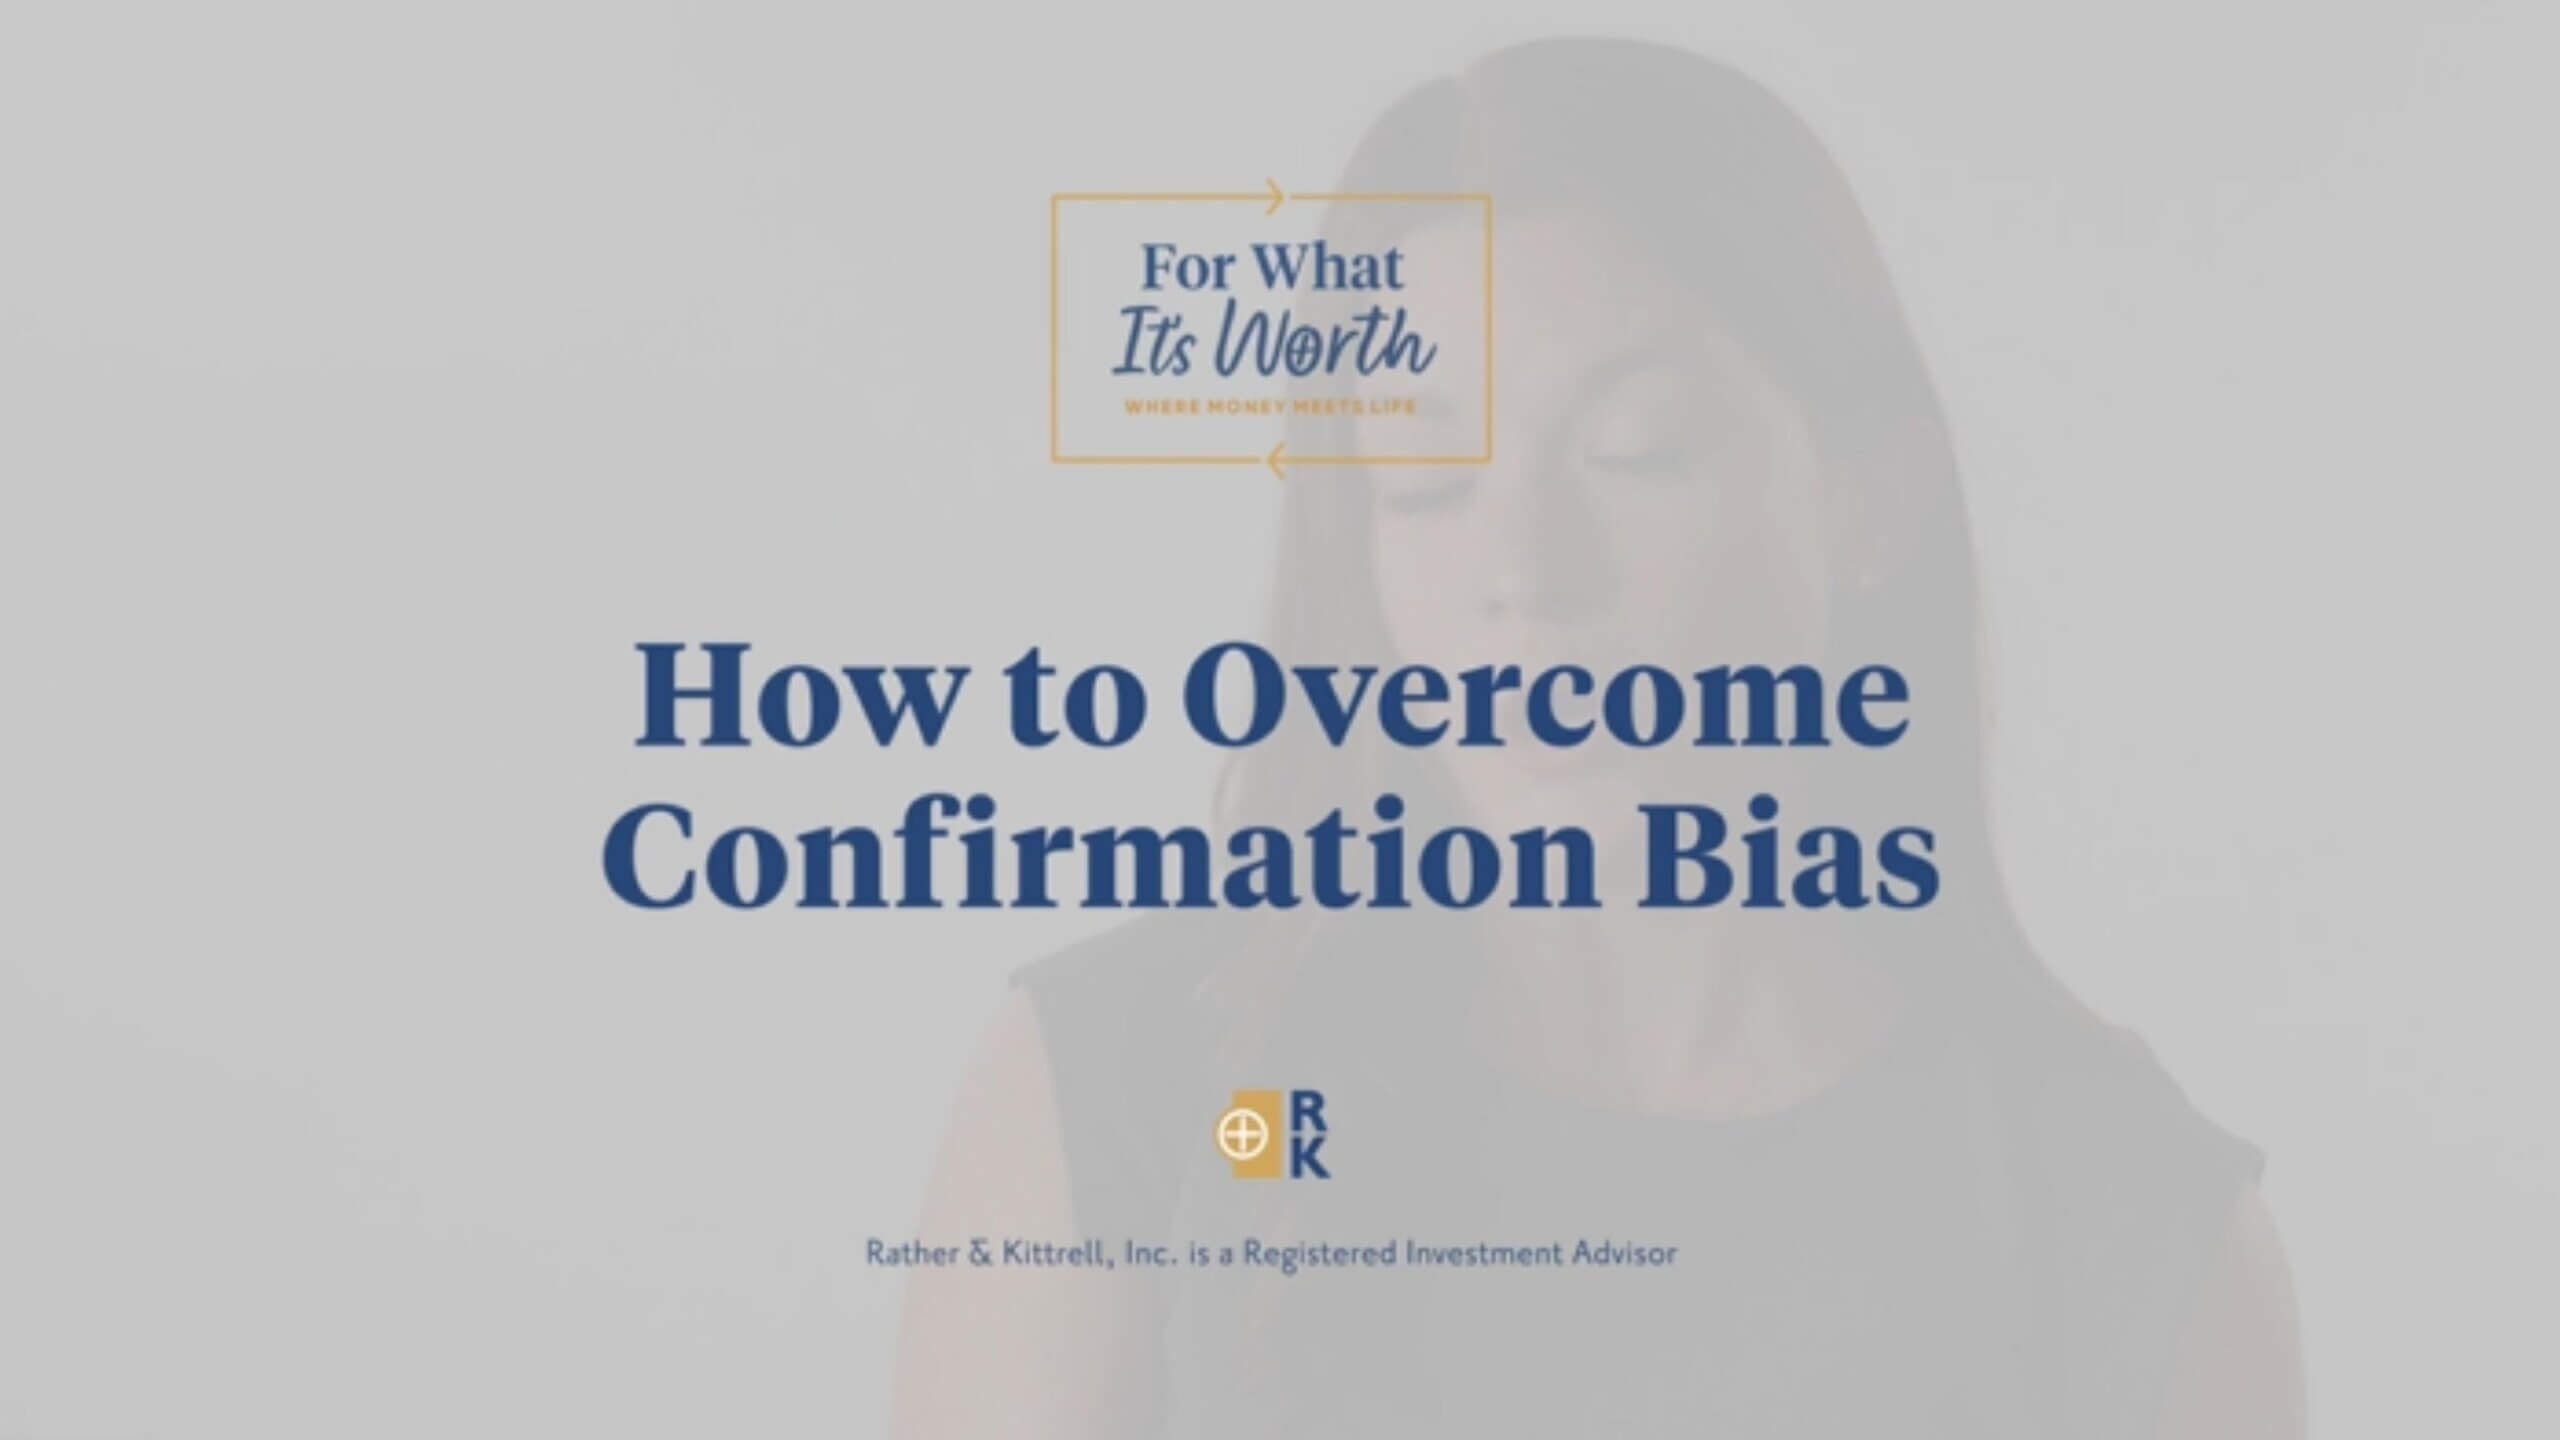 How to overcome confirmation bias